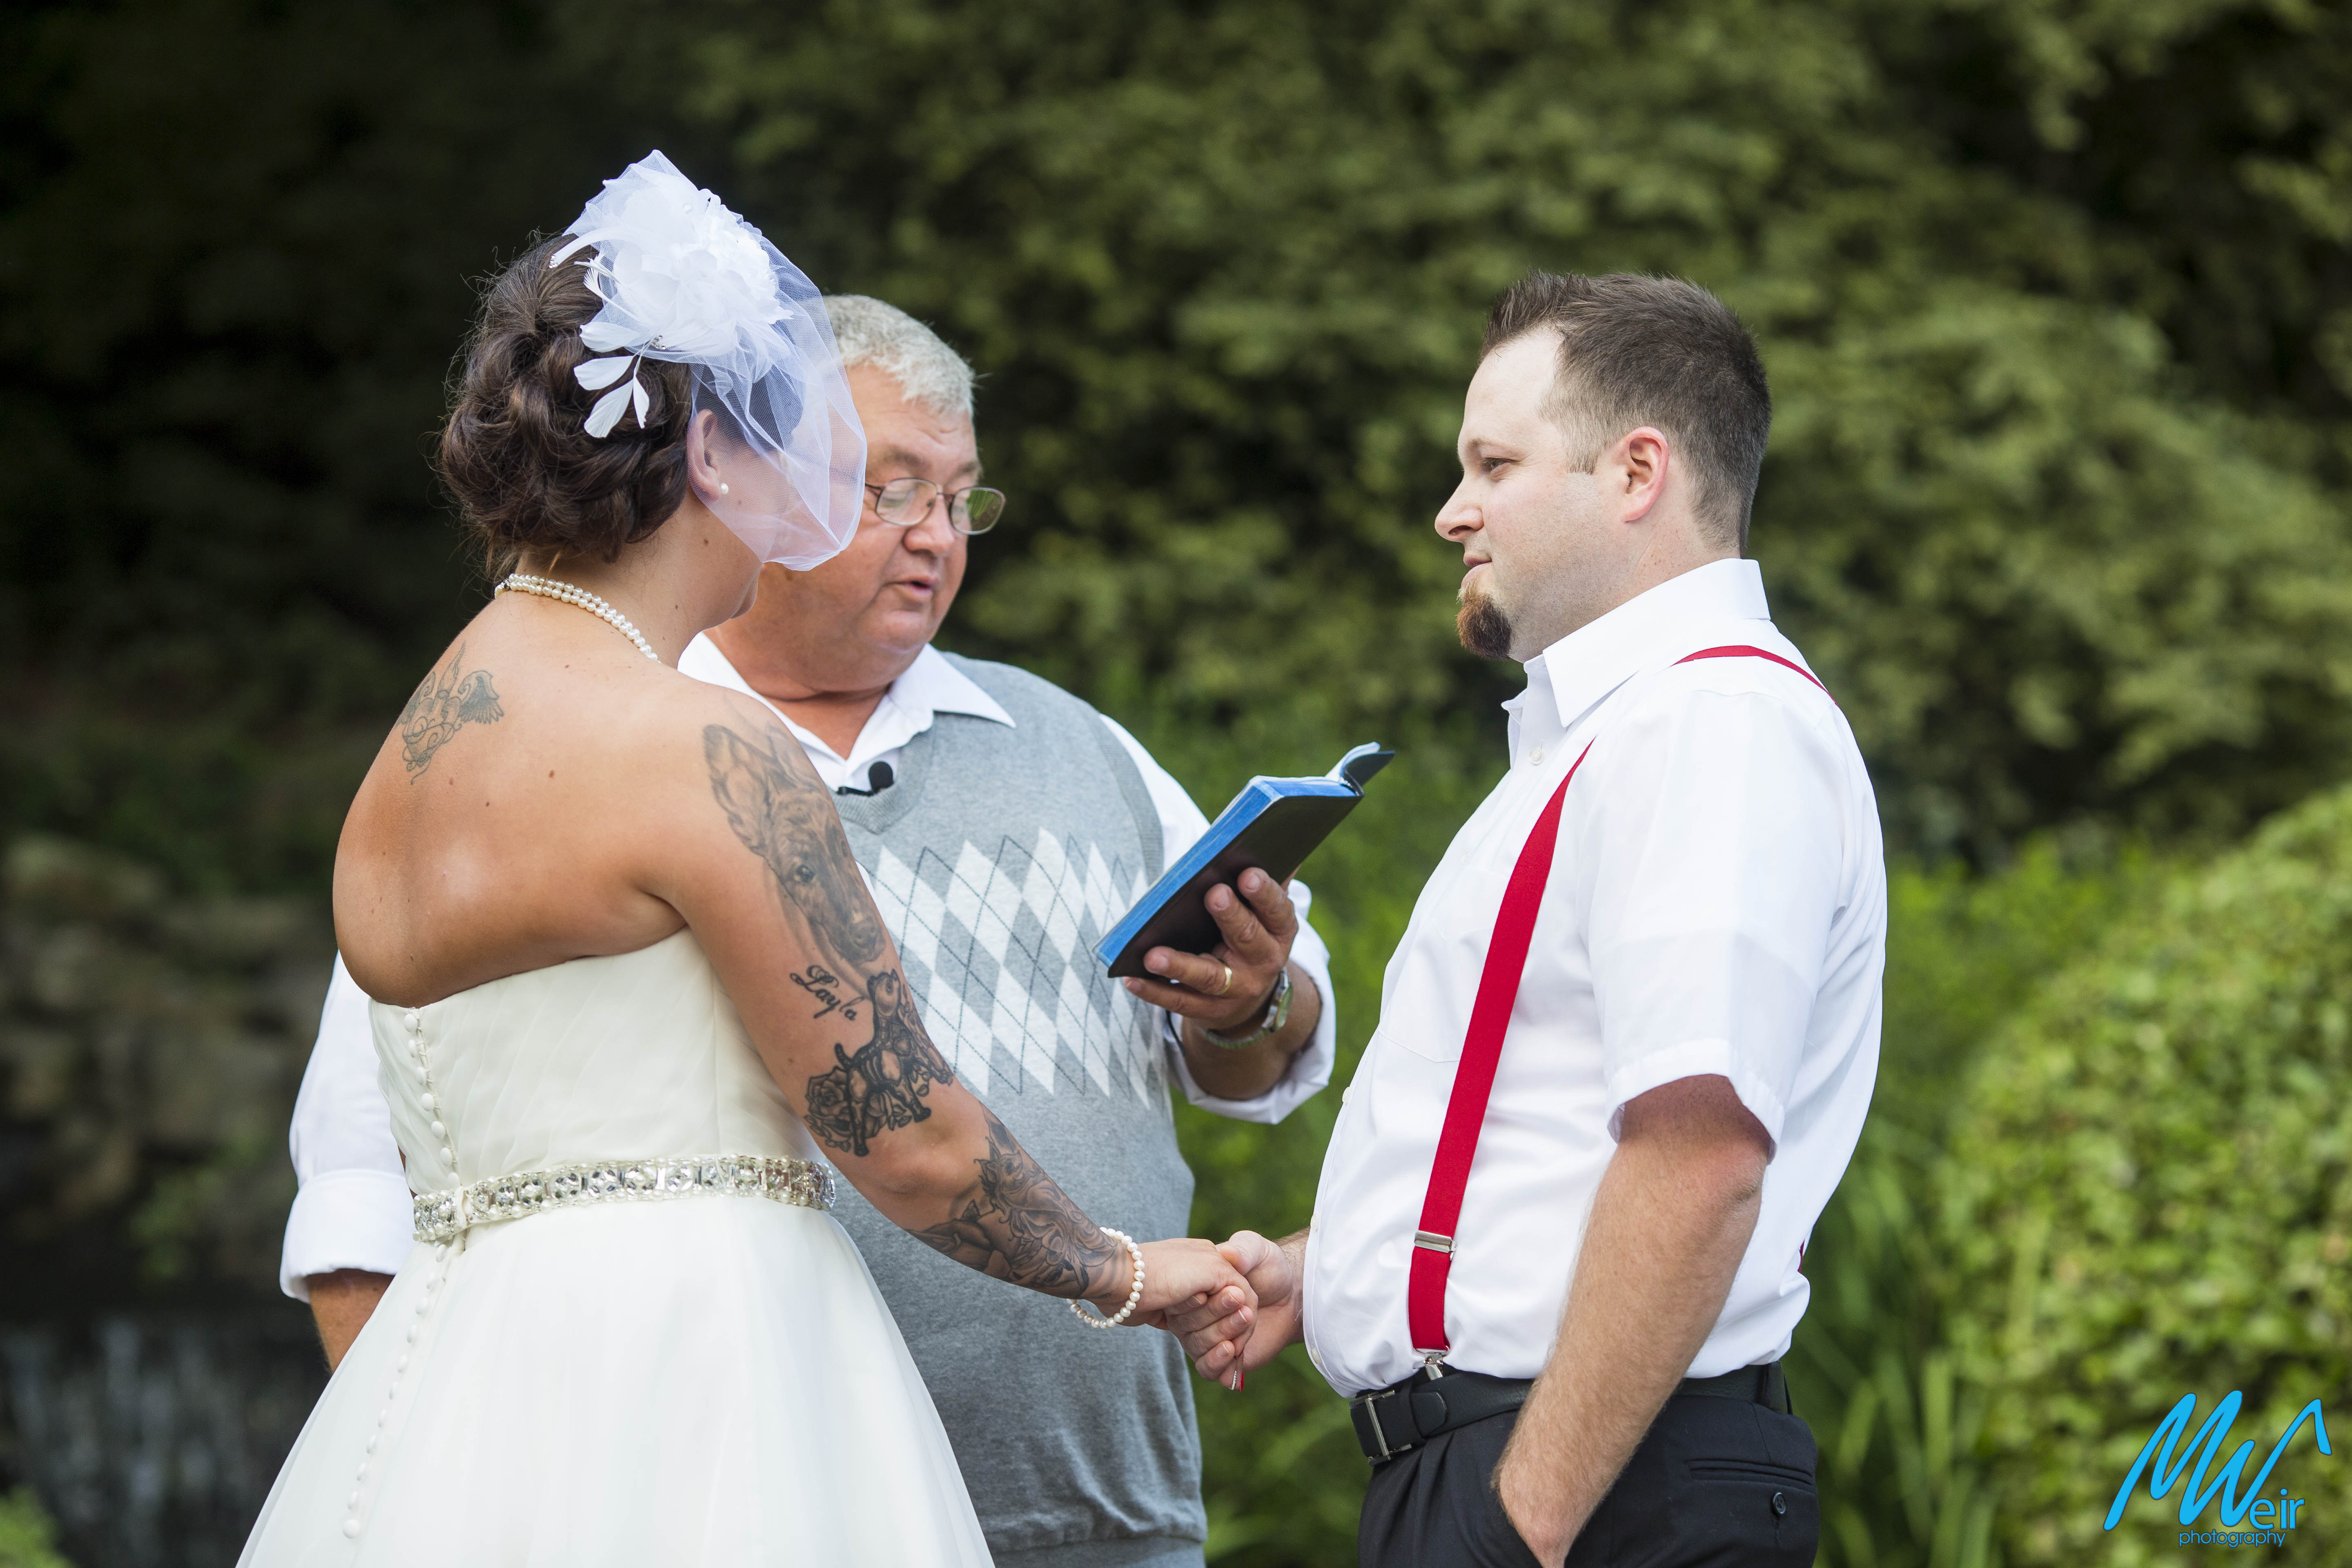 groom reciting vows during wedding ceremony